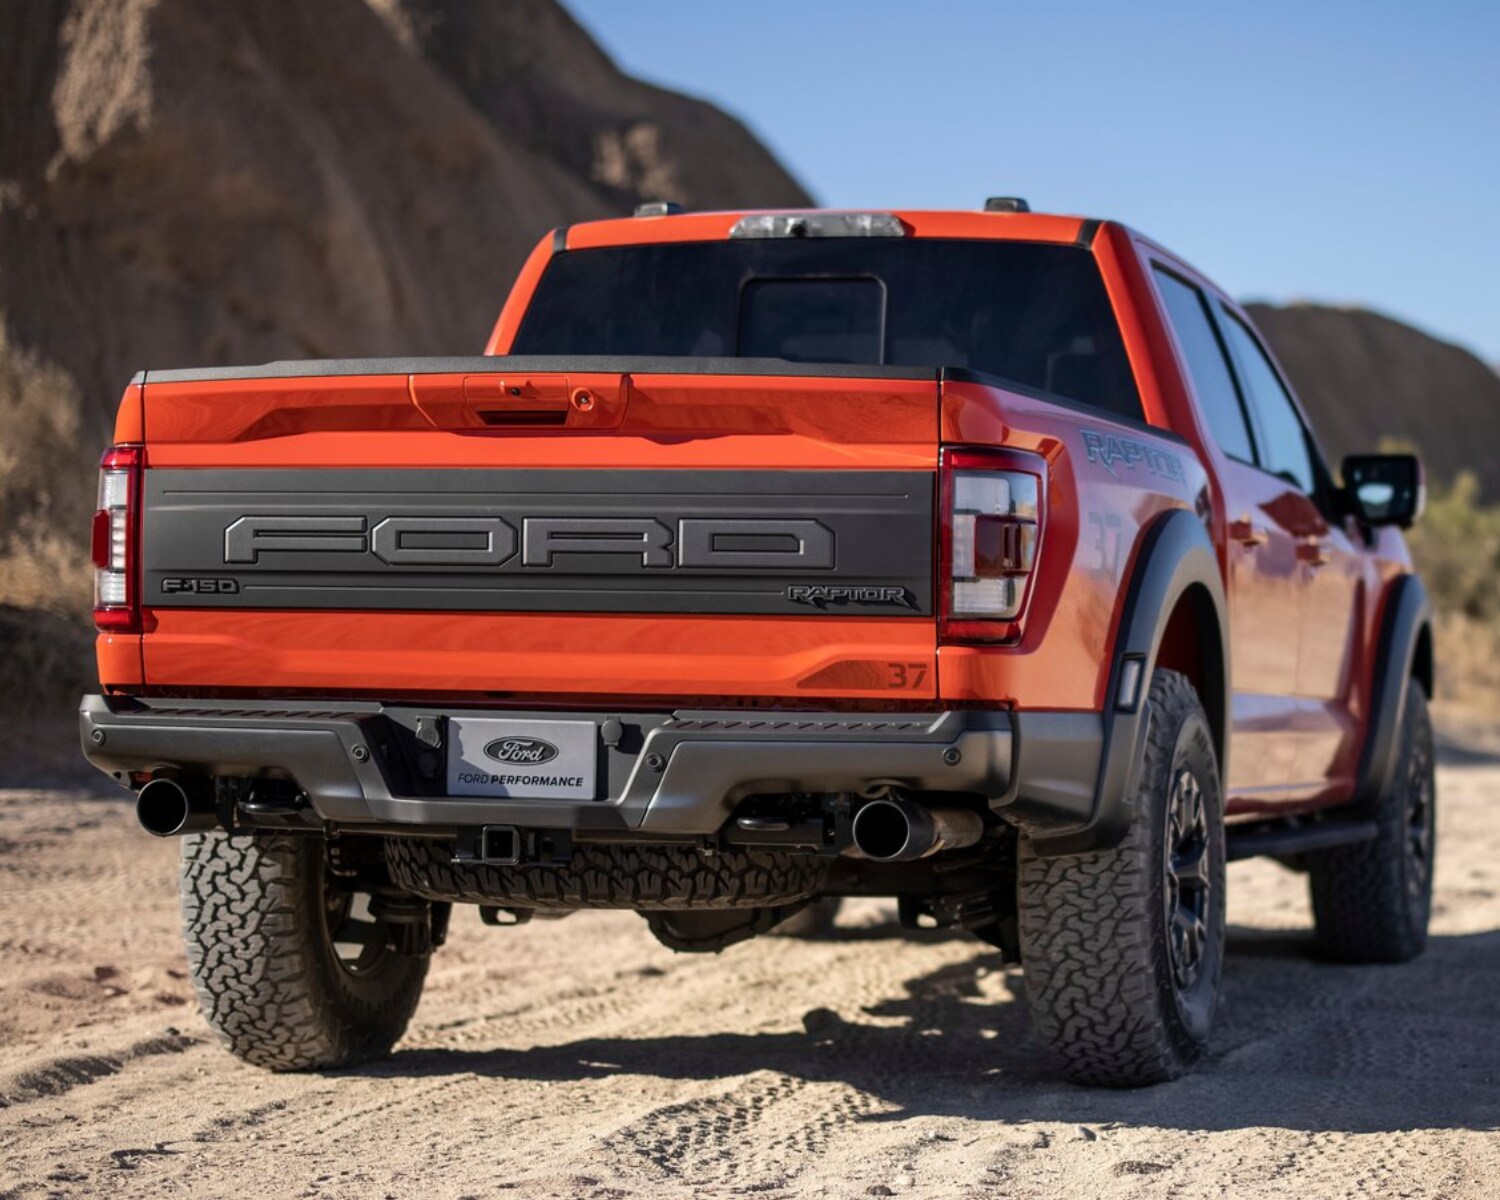 Fresh, rear exterior design of the new 2021 Ford Raptor off-road truck